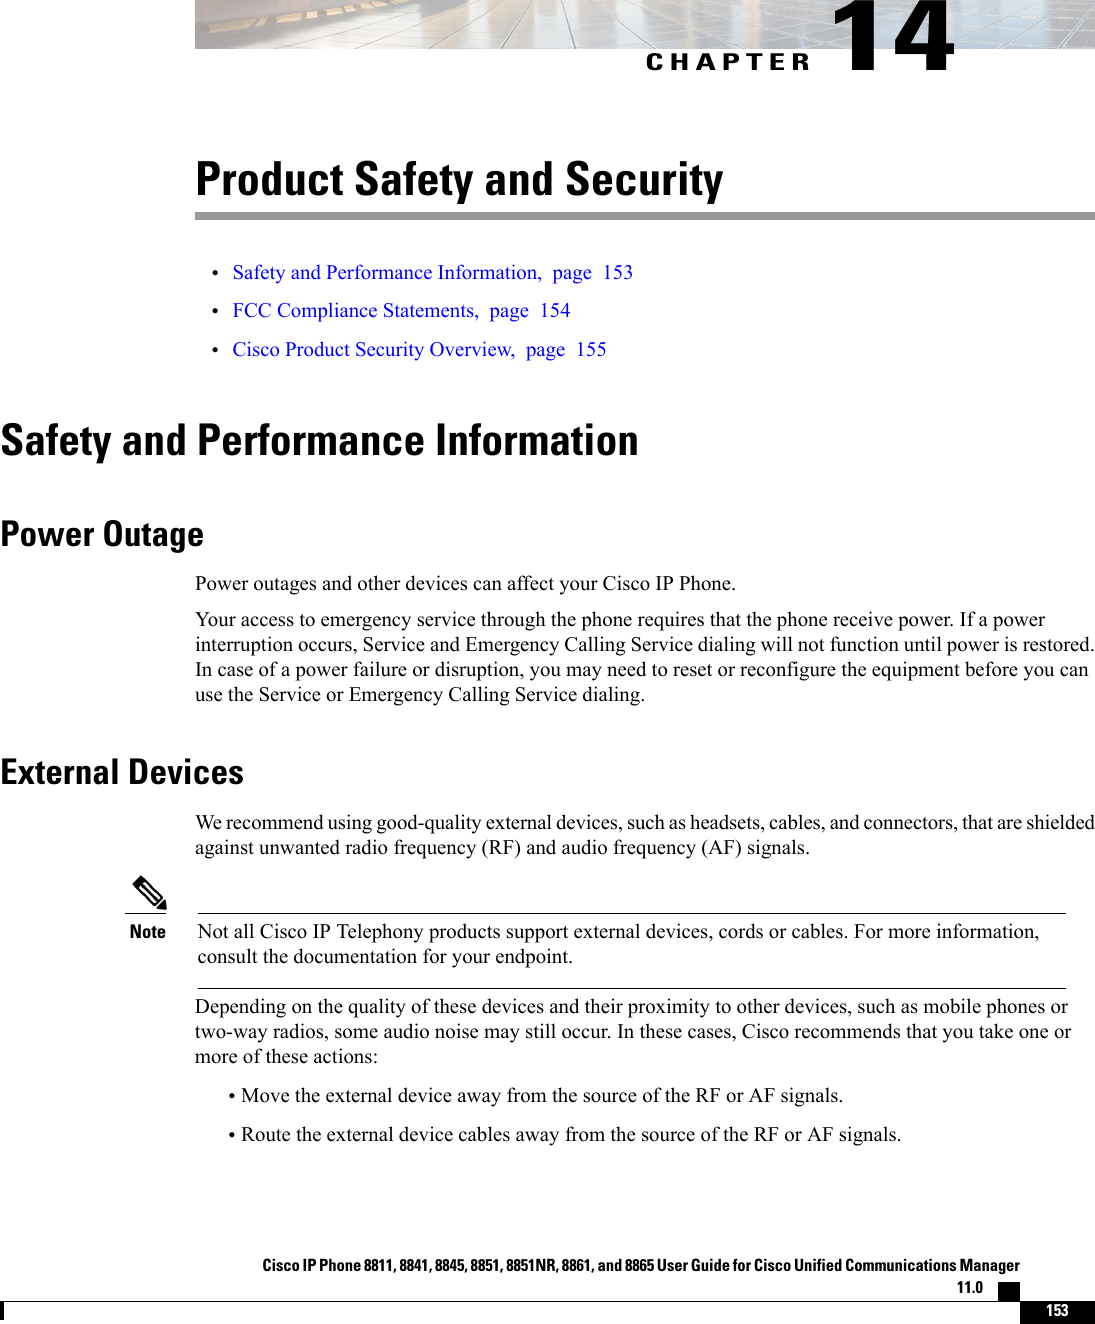 CHAPTER 14Product Safety and Security•Safety and Performance Information, page 153•FCC Compliance Statements, page 154•Cisco Product Security Overview, page 155Safety and Performance InformationPower OutagePower outages and other devices can affect your Cisco IP Phone.Your access to emergency service through the phone requires that the phone receive power. If a powerinterruption occurs, Service and Emergency Calling Service dialing will not function until power is restored.In case of a power failure or disruption, you may need to reset or reconfigure the equipment before you canuse the Service or Emergency Calling Service dialing.External DevicesWe recommend using good-quality external devices, such as headsets, cables, and connectors, that are shieldedagainst unwanted radio frequency (RF) and audio frequency (AF) signals.Not all Cisco IP Telephony products support external devices, cords or cables. For more information,consult the documentation for your endpoint.NoteDepending on the quality of these devices and their proximity to other devices, such as mobile phones ortwo-way radios, some audio noise may still occur. In these cases, Cisco recommends that you take one ormore of these actions:•Move the external device away from the source of the RF or AF signals.•Route the external device cables away from the source of the RF or AF signals.Cisco IP Phone 8811, 8841, 8845, 8851, 8851NR, 8861, and 8865 User Guide for Cisco Unified Communications Manager11.0    153